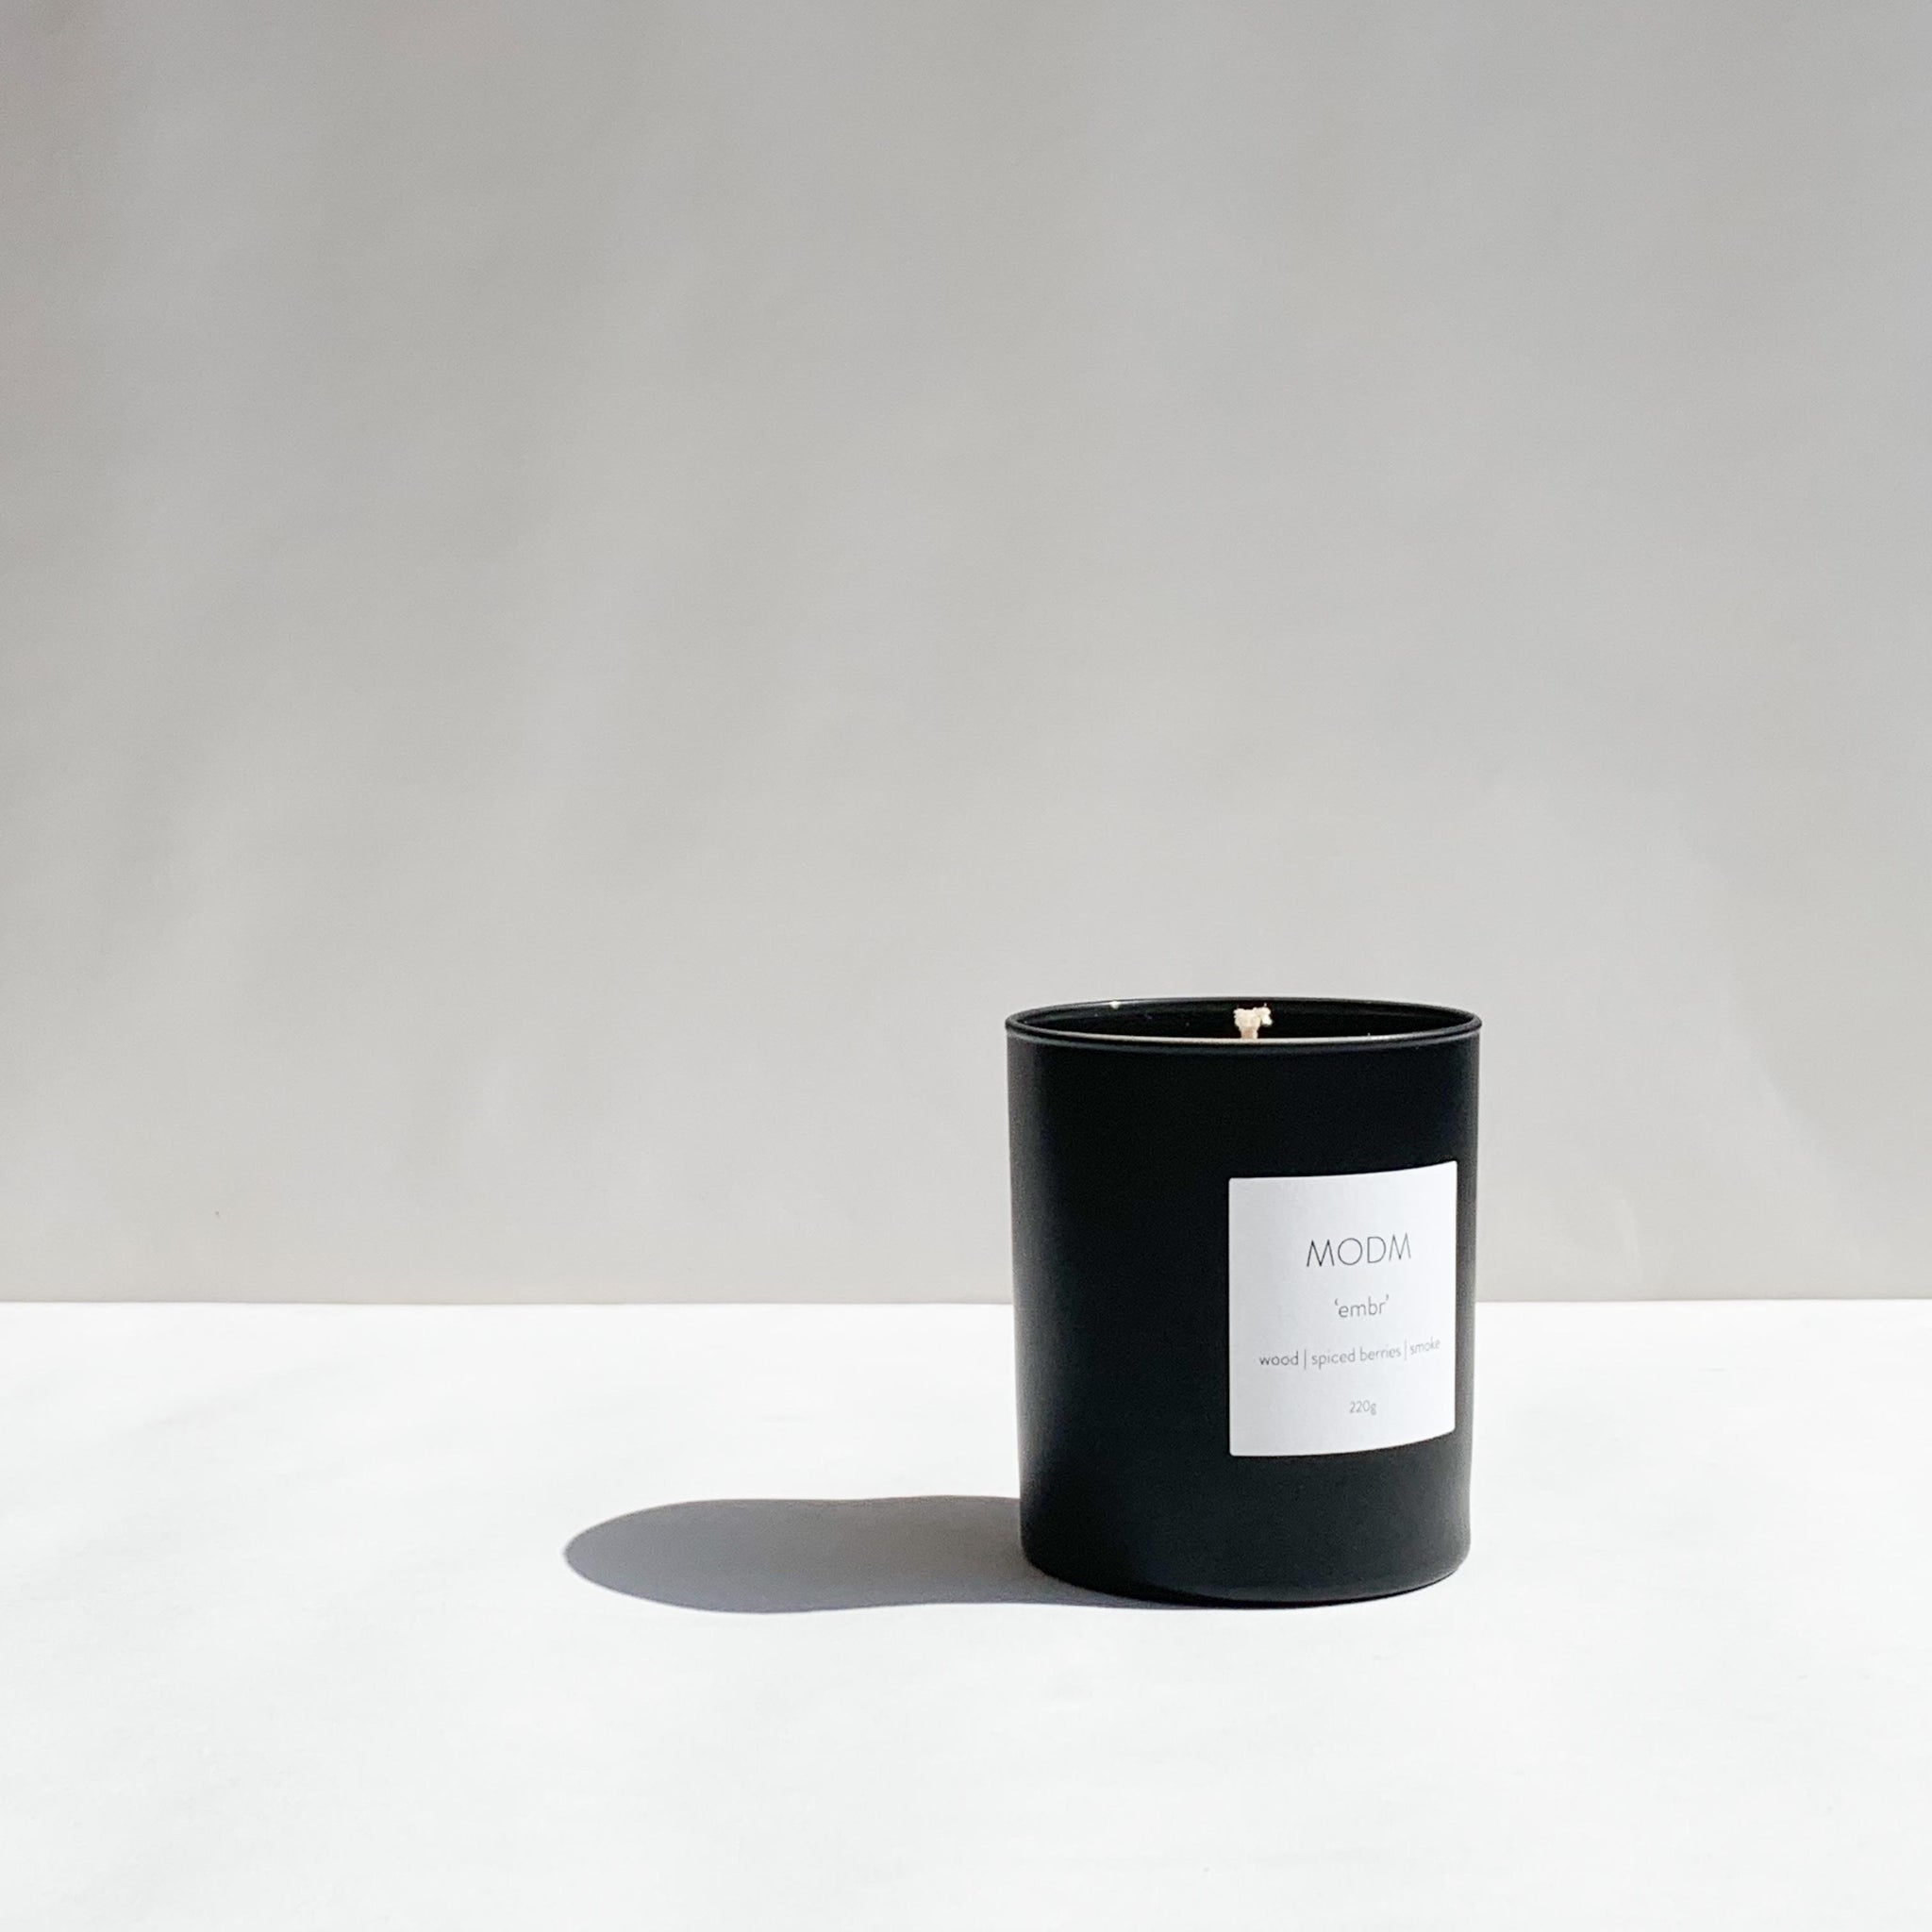 ‘EMBR’ candle